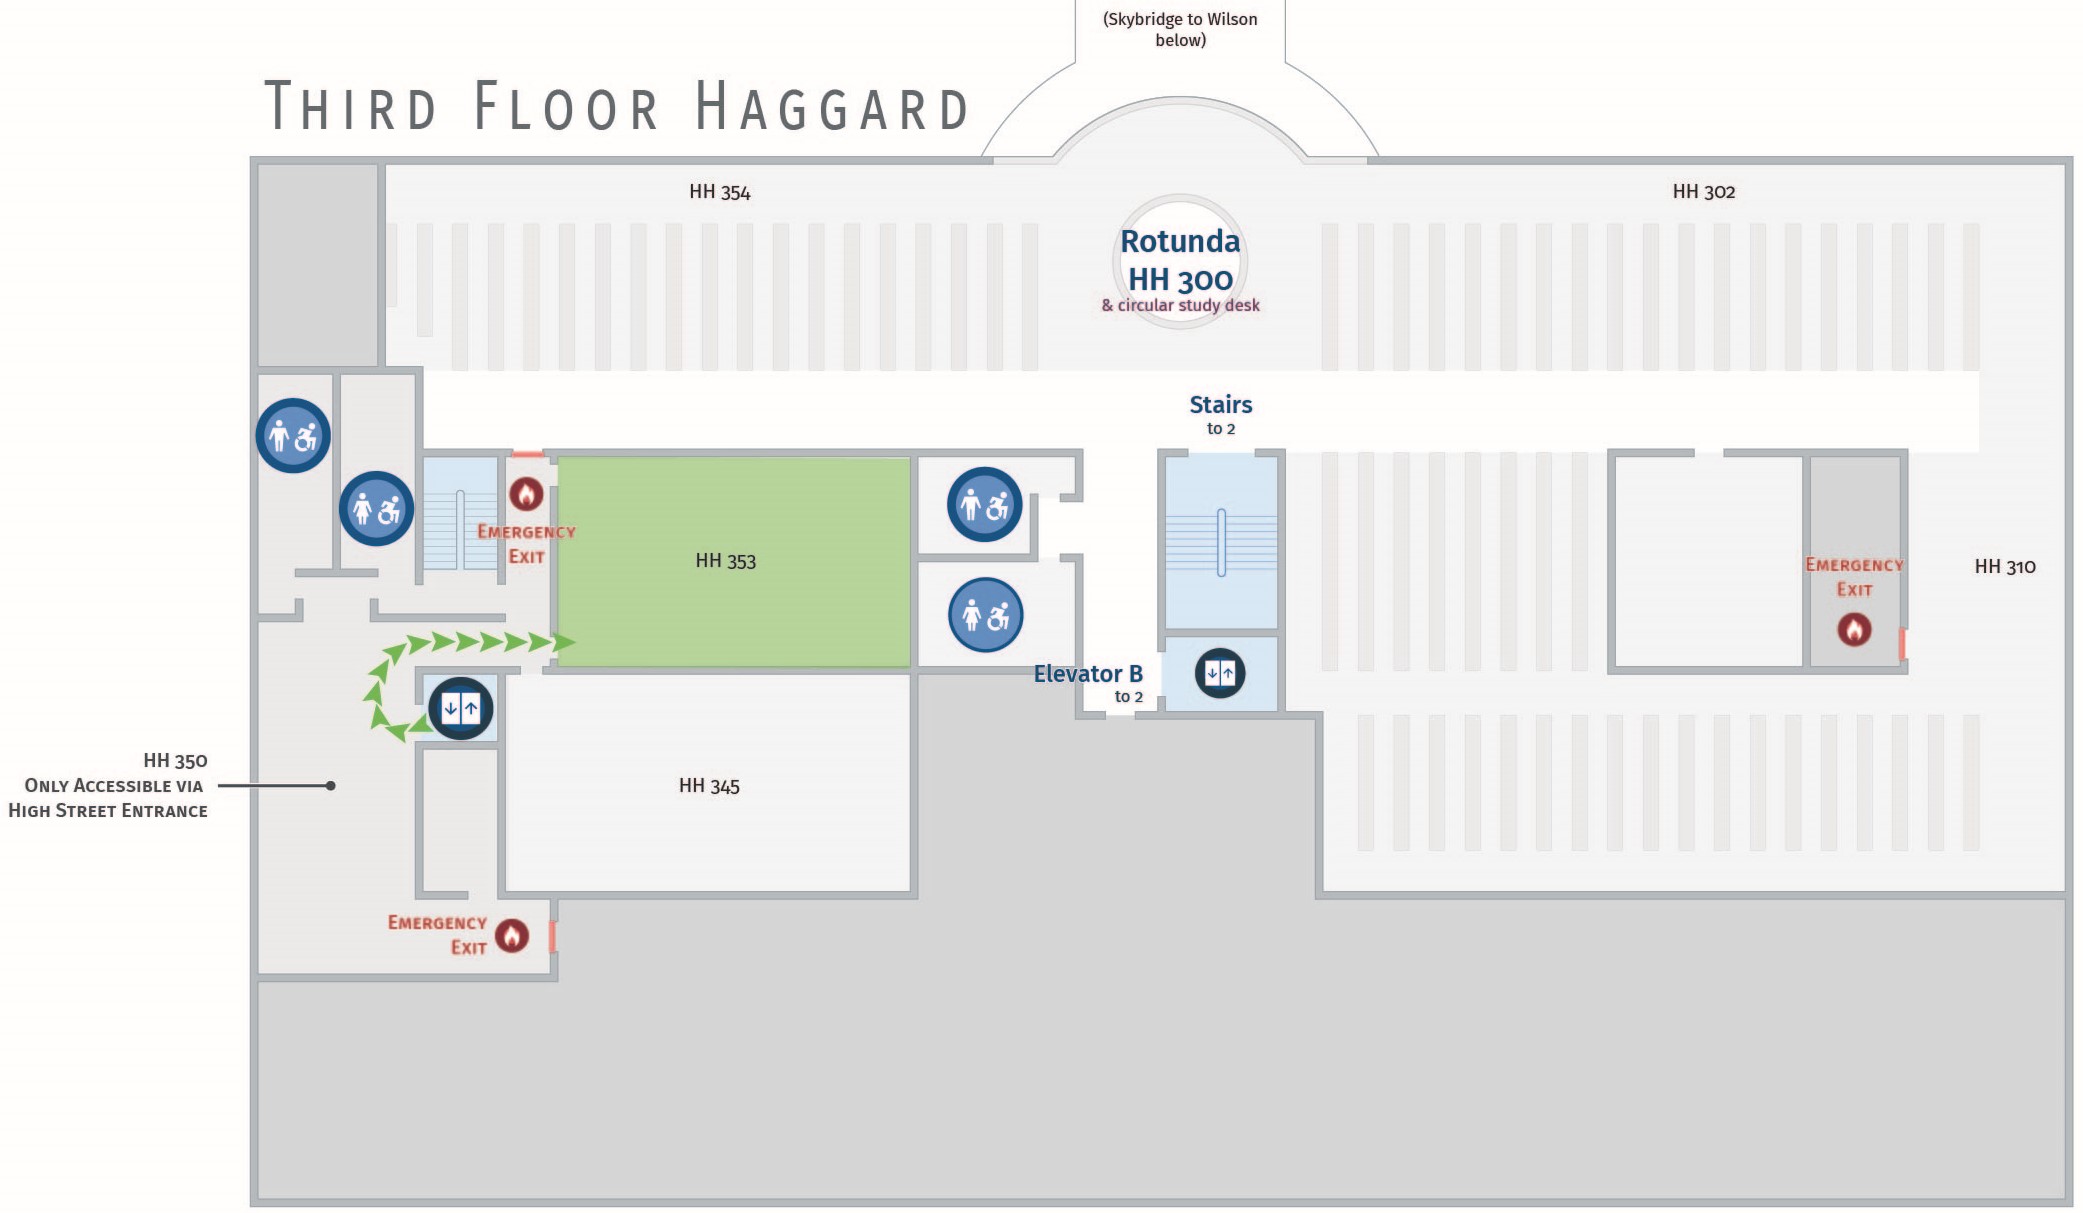 Floor plan, third floor of Haggard with accessible path to HH 353.